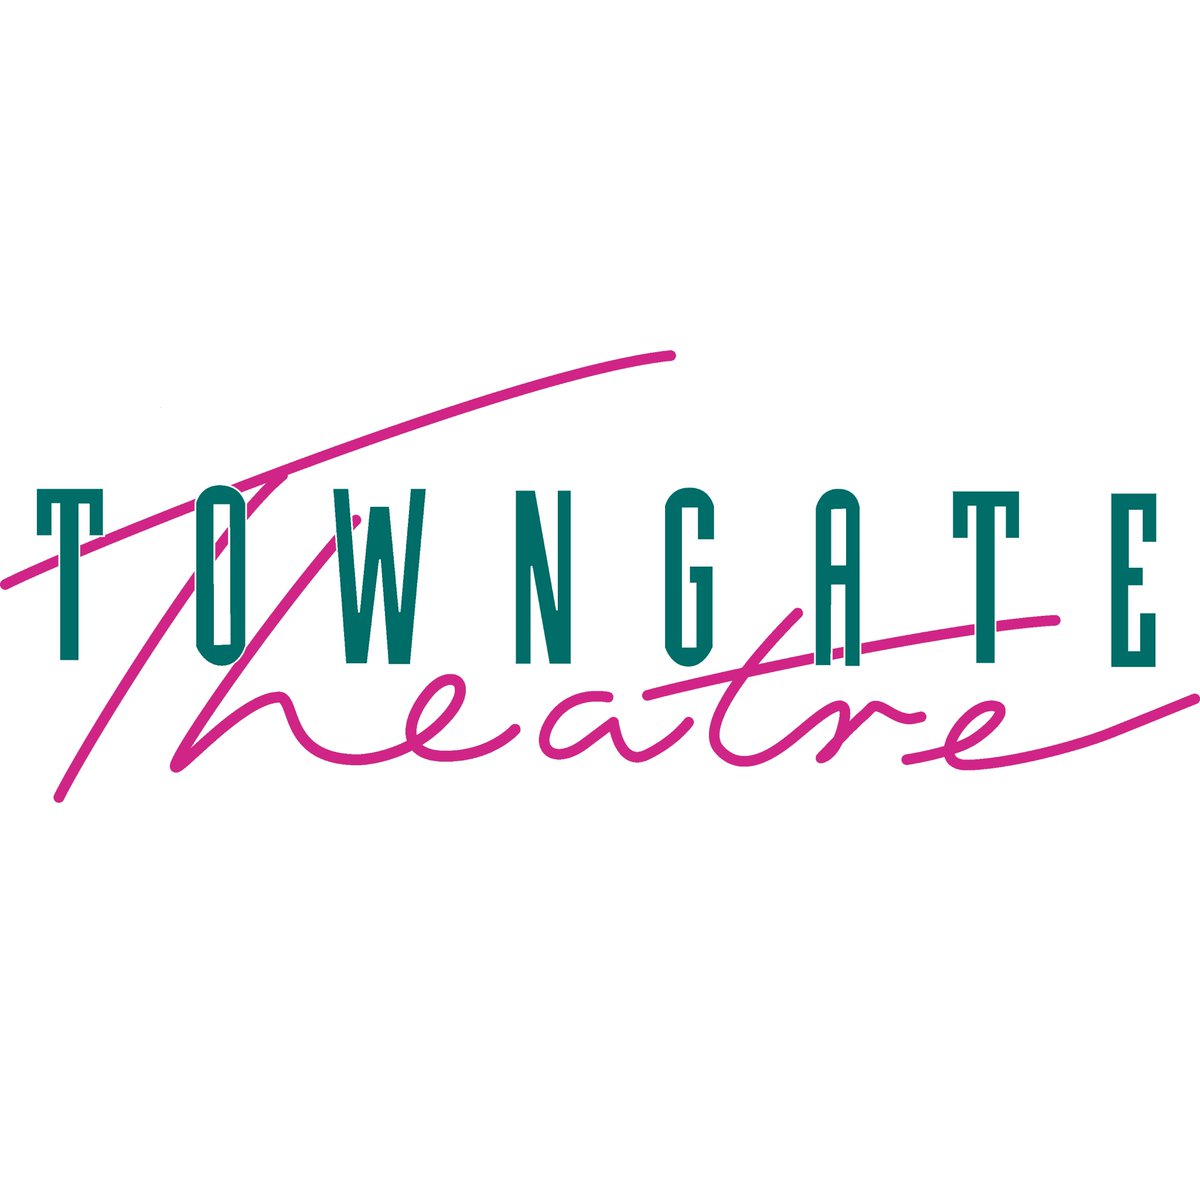 Louise Frankton from @TowngateTheatre with the weekly roundup next on drivetime with @RosalynConnors Tune in on FM or online gateway978.com/live